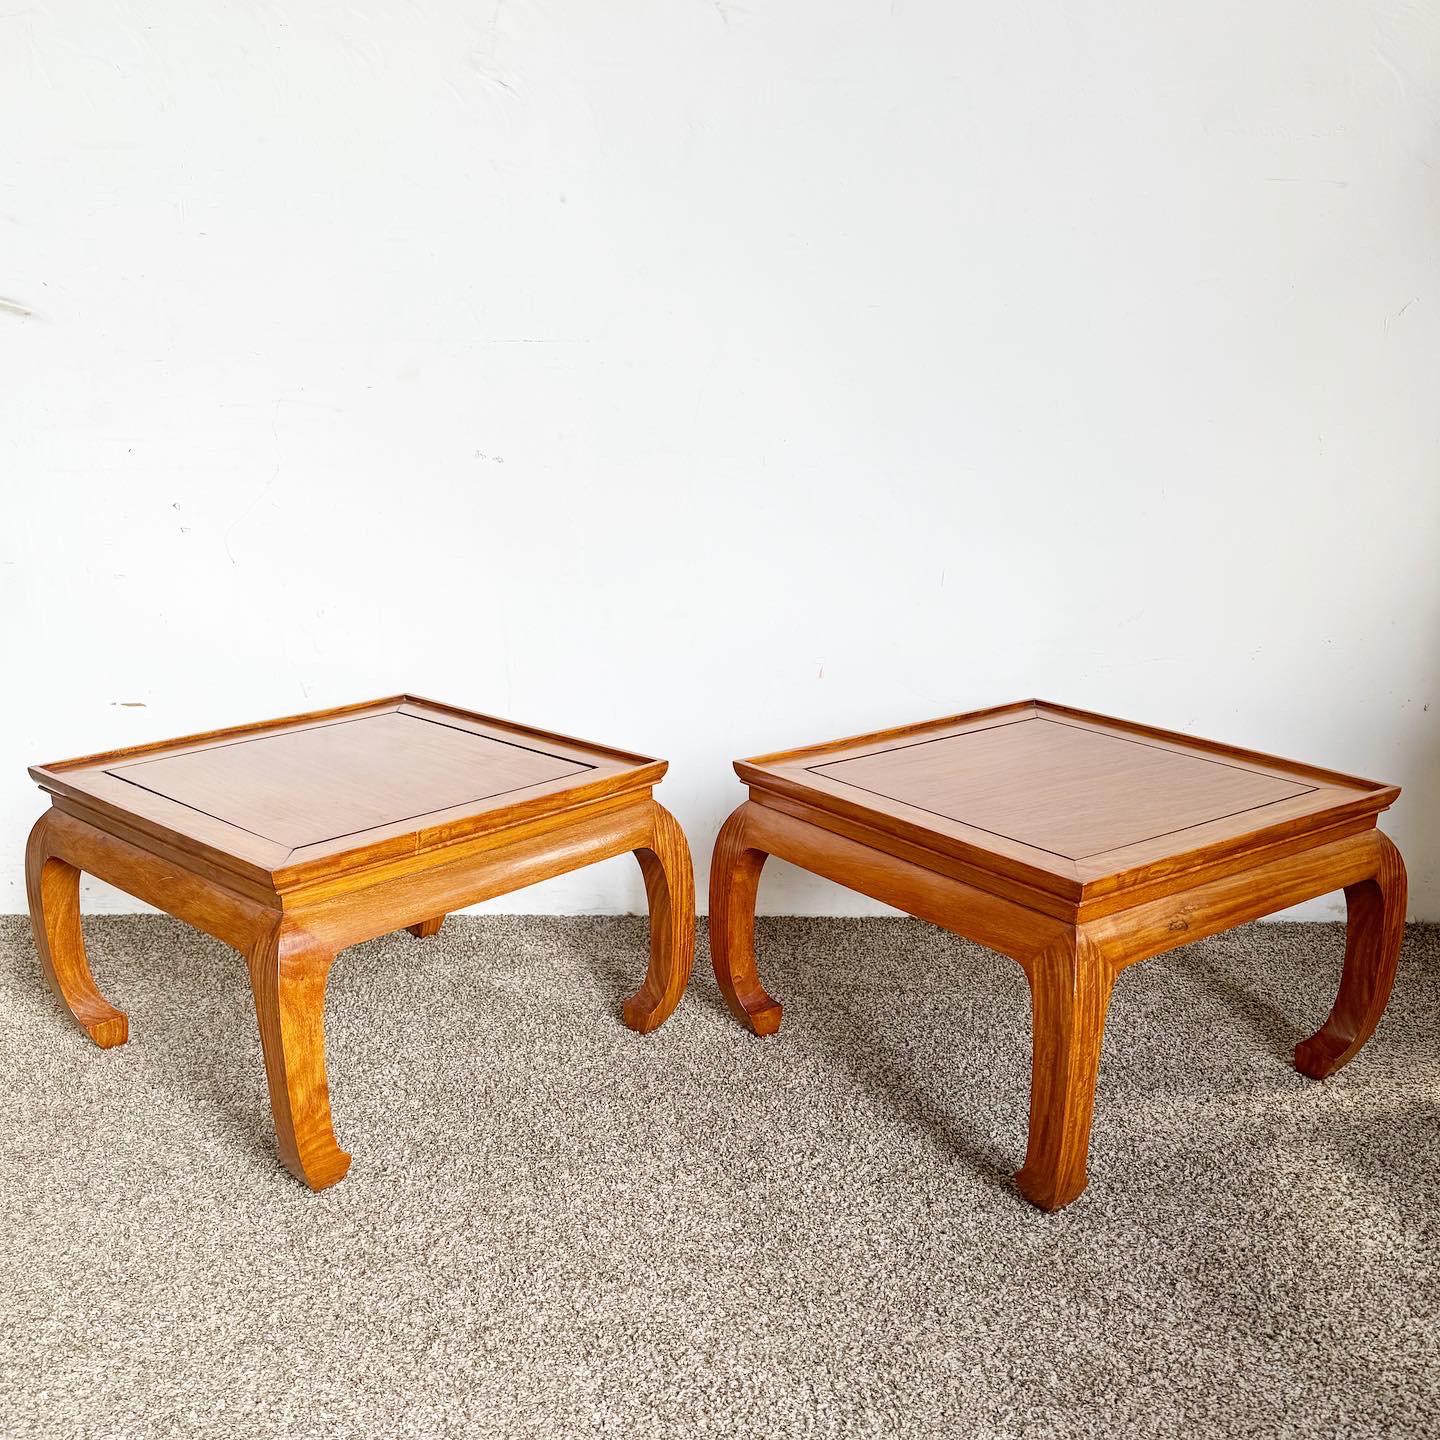 Chinoiserie Ming Style Wooden Side Tables - a Pair For Sale 2